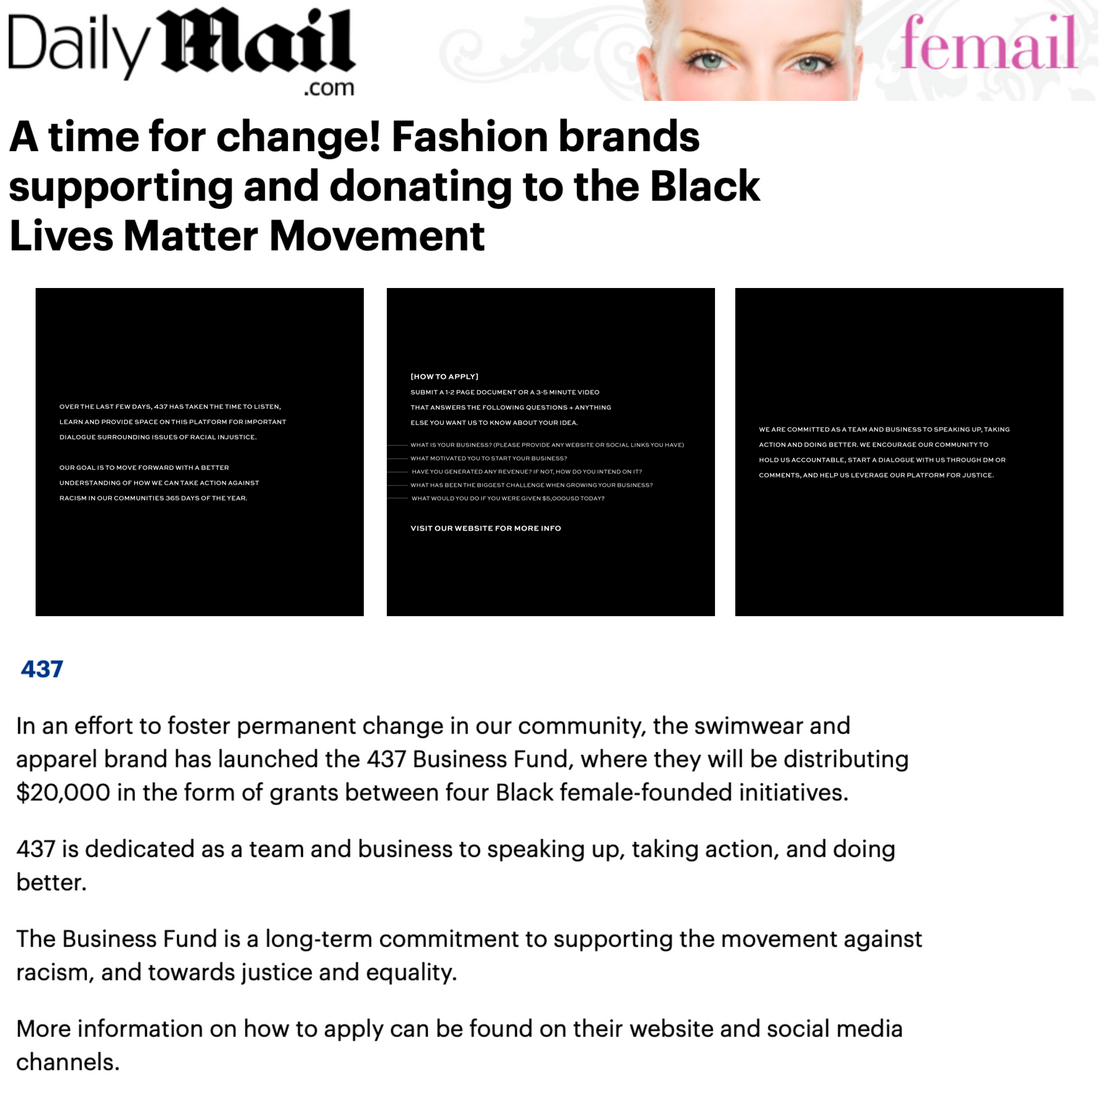 DAILY MAIL - 437 BUSINESS FUND